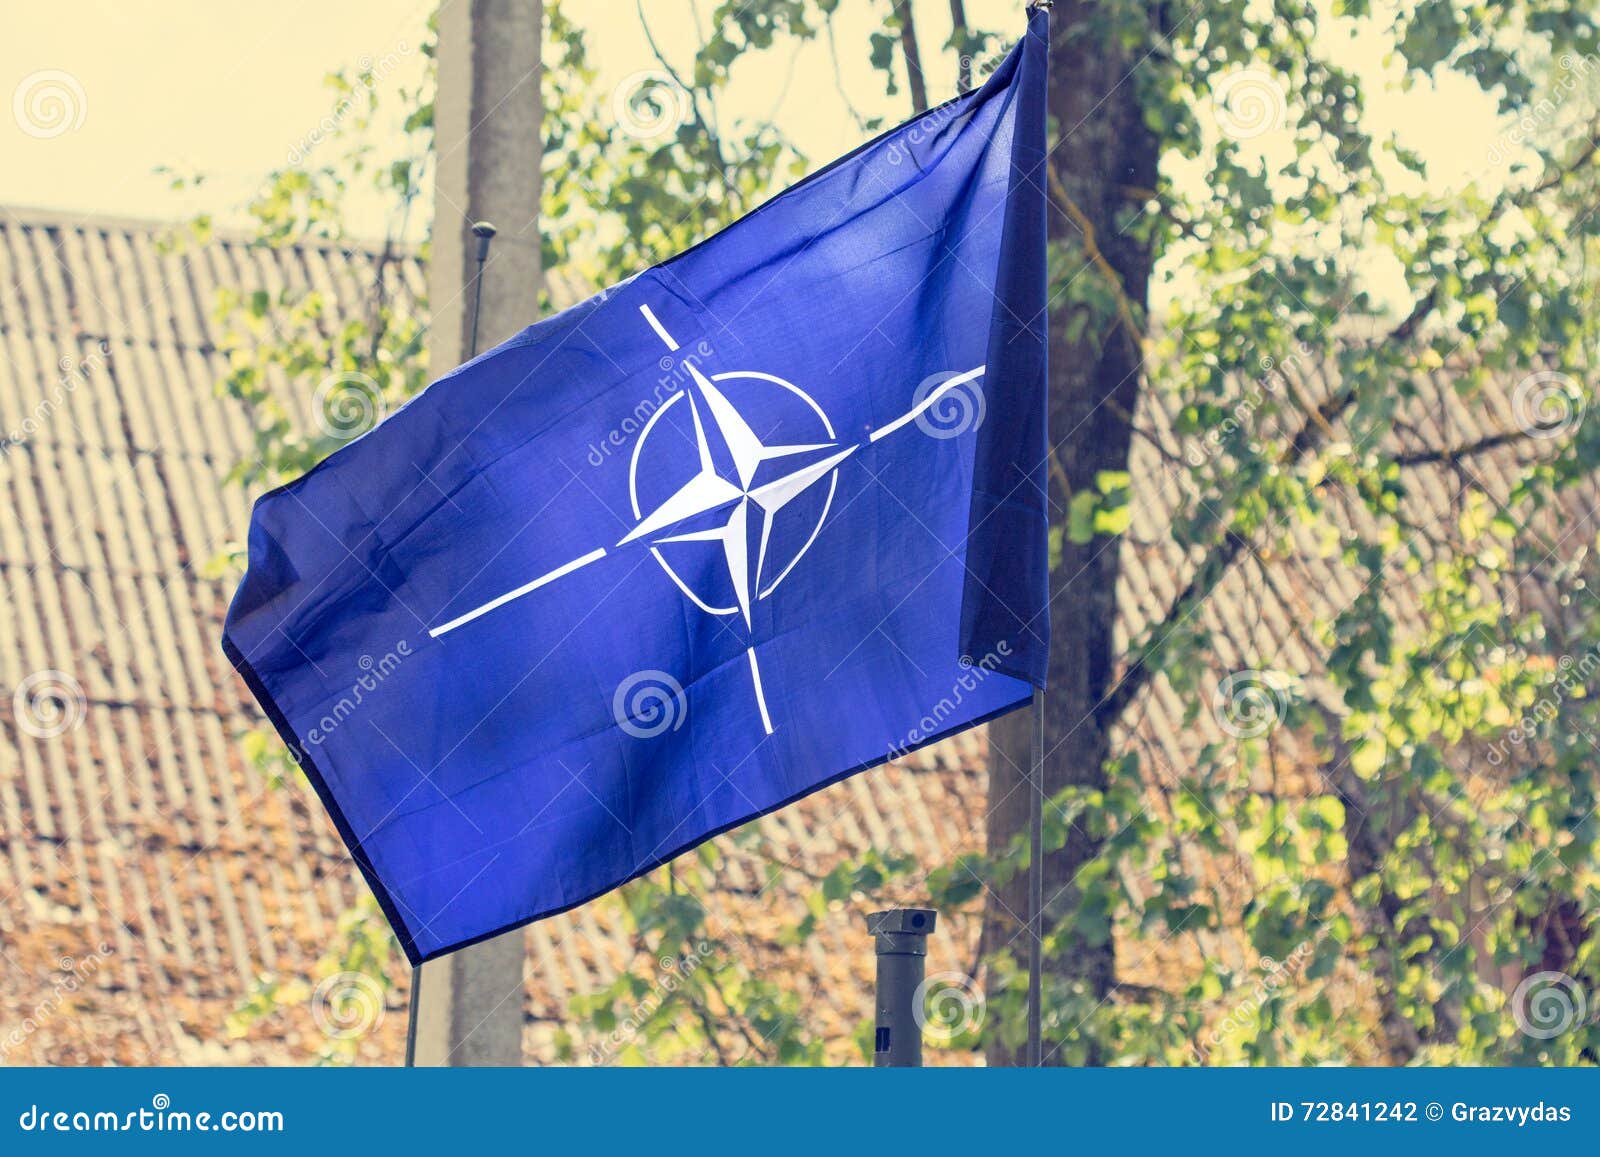 the flag of the nato